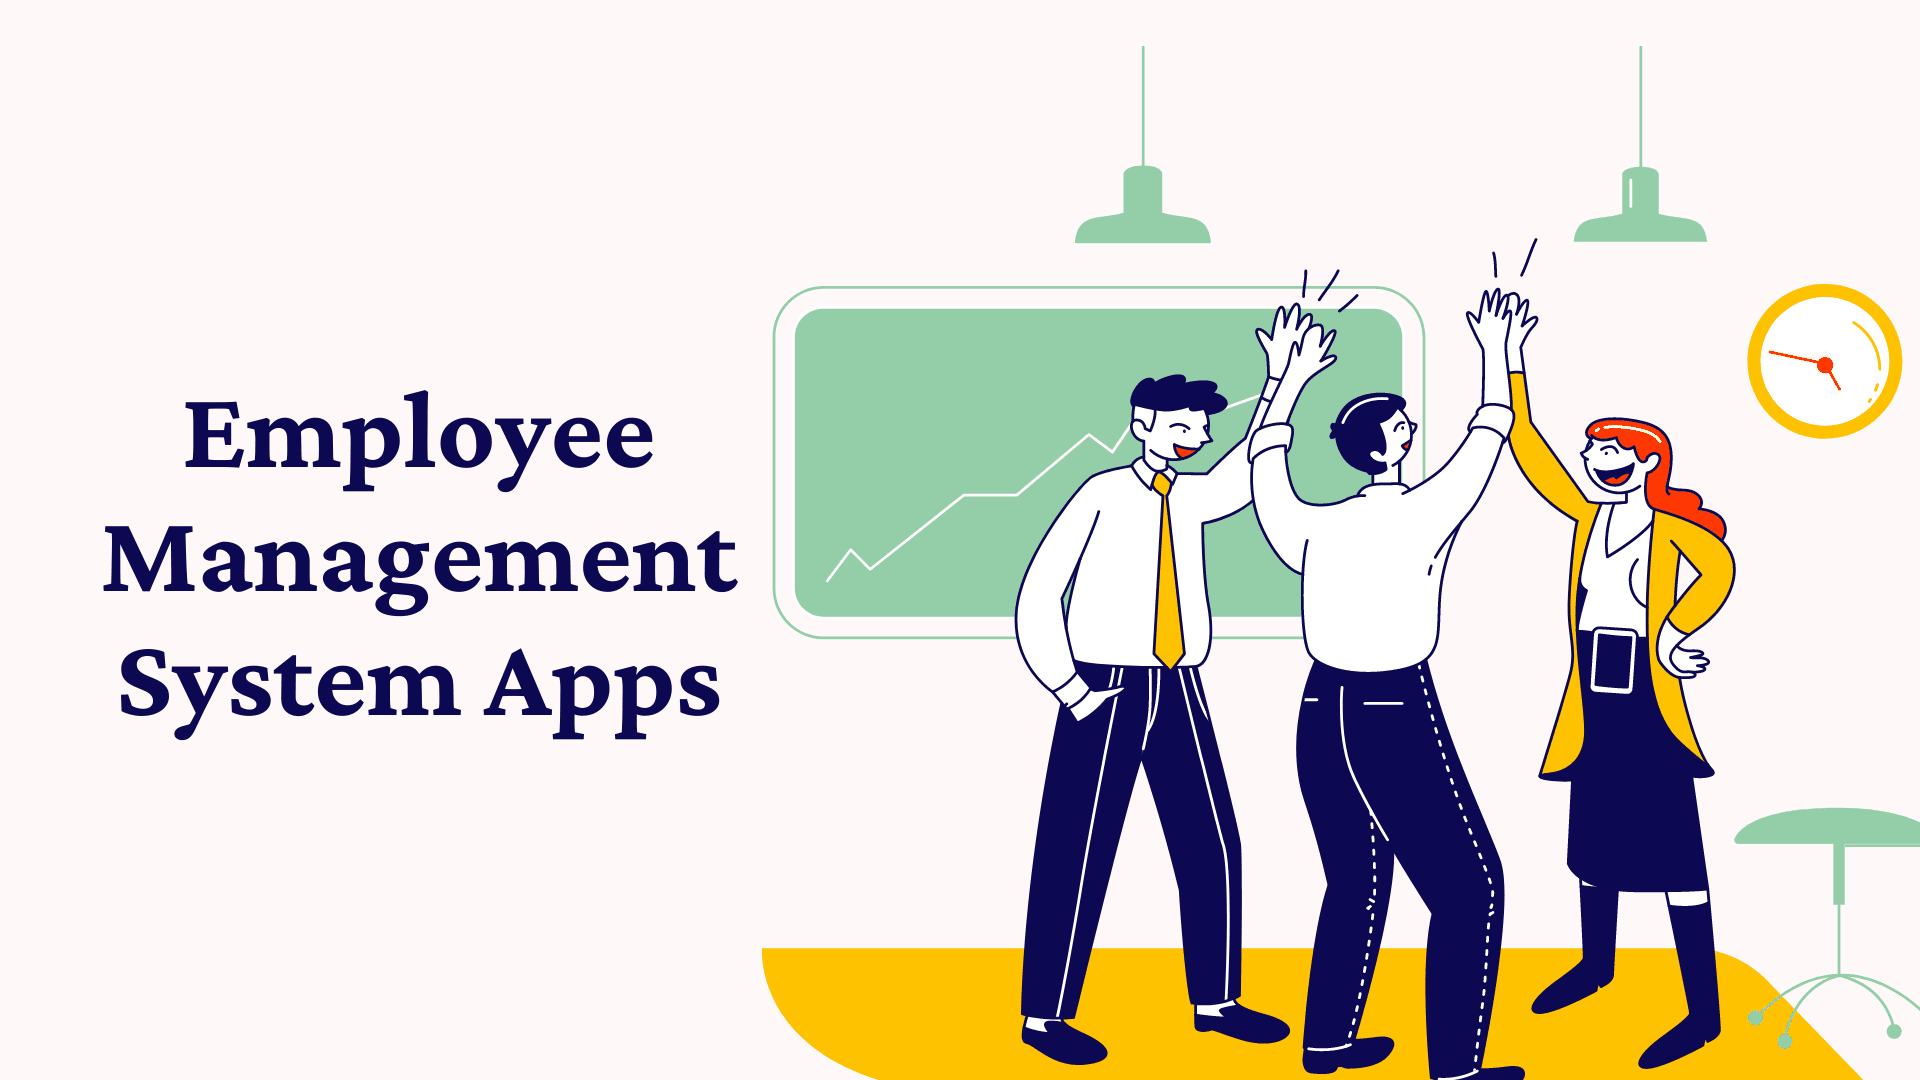 8 Employee Management System Apps for Happier Workplaces